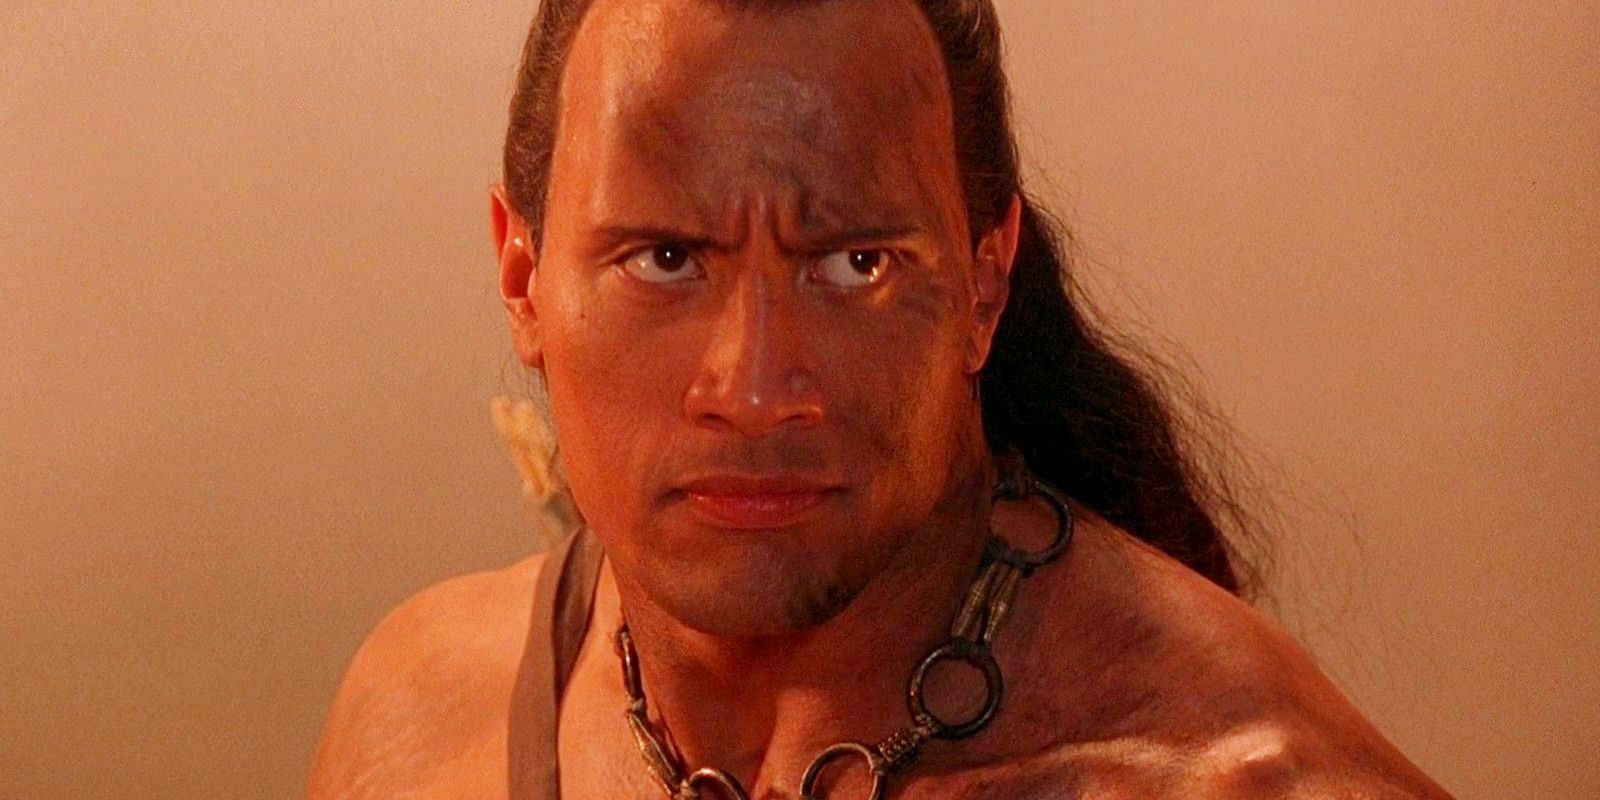 The Scorpion King glares in his titular film 